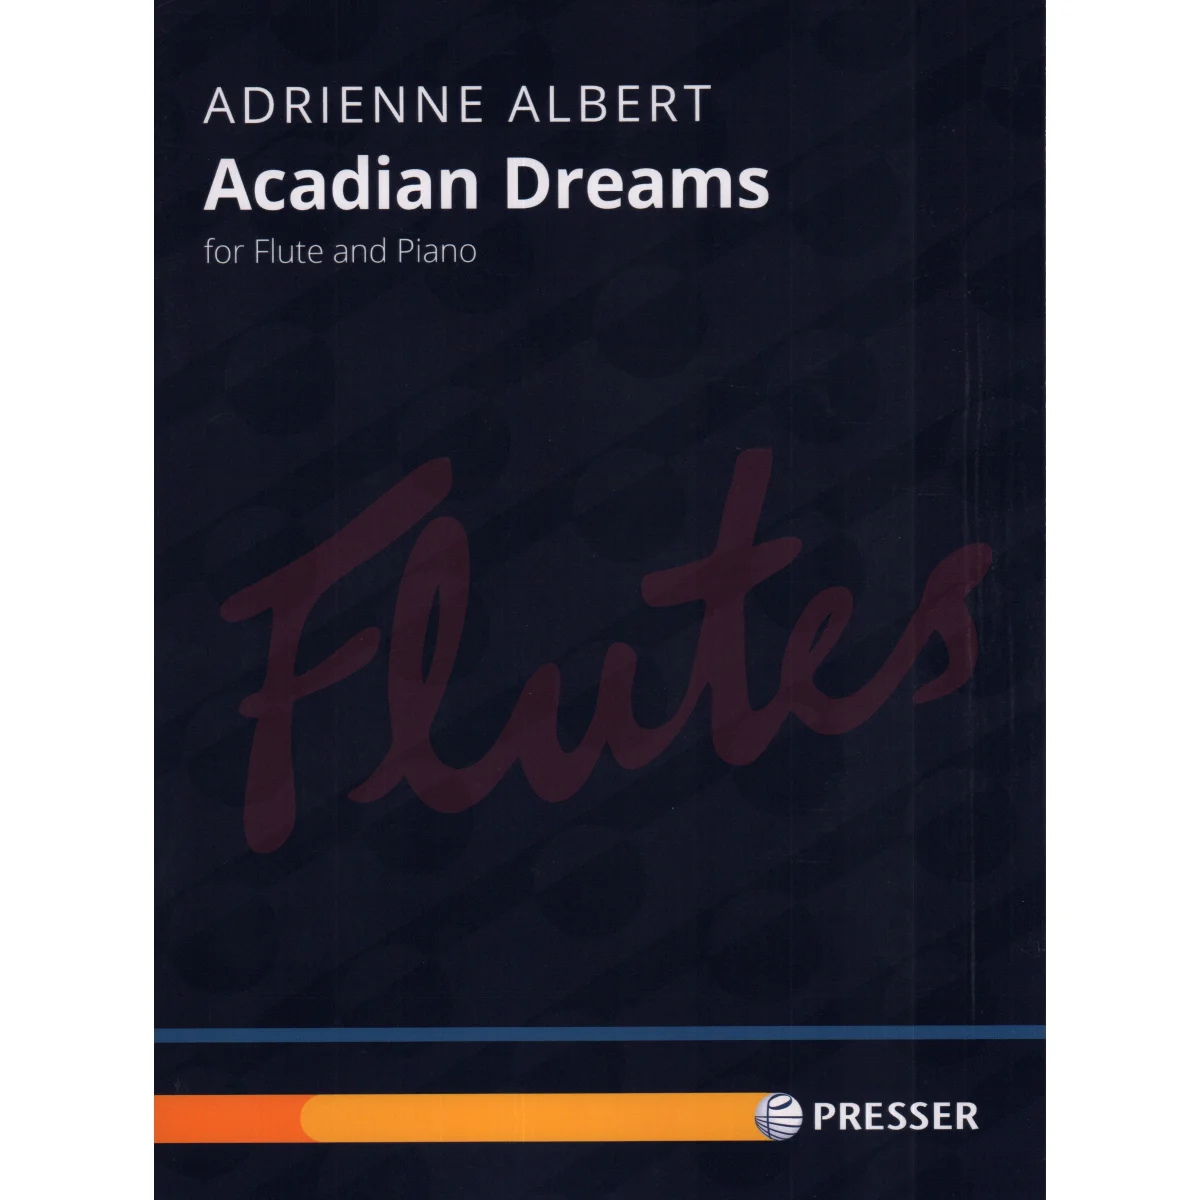 Acadian Dreams for Flute and Piano